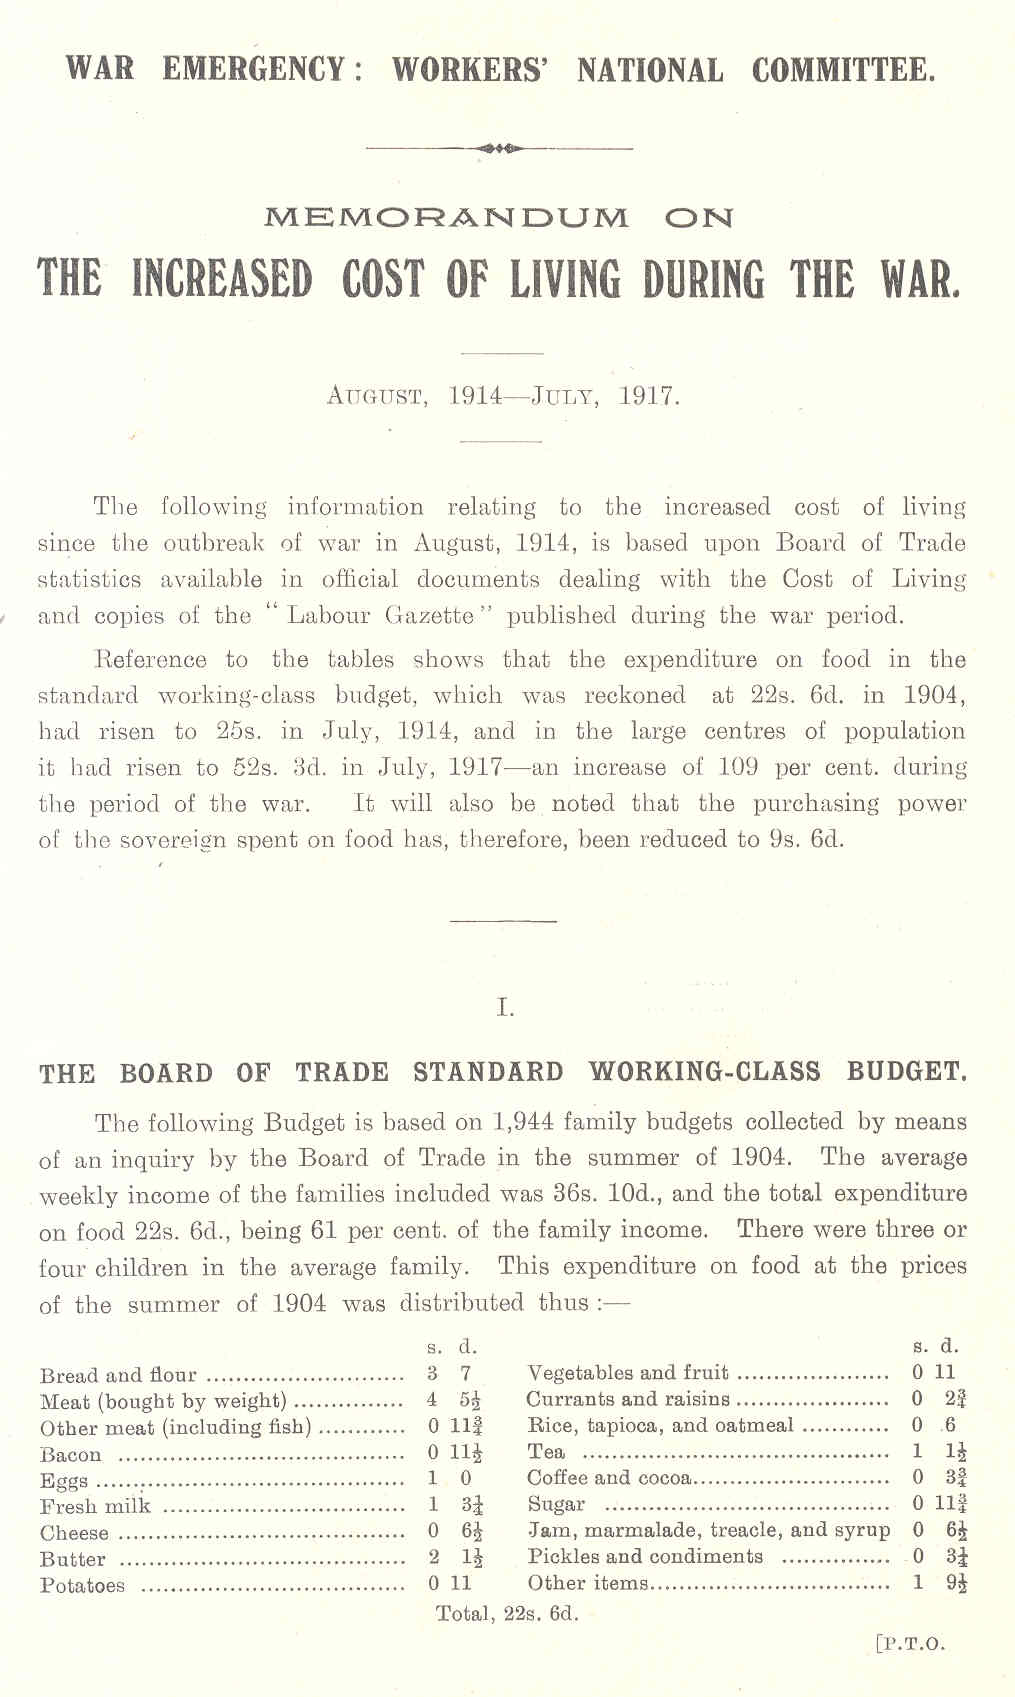 Front page of leaflet "Memorandum on the increased cost of living during the war, August, 1914 - July, 1917", including summary of the Board of Trade standard working class budget